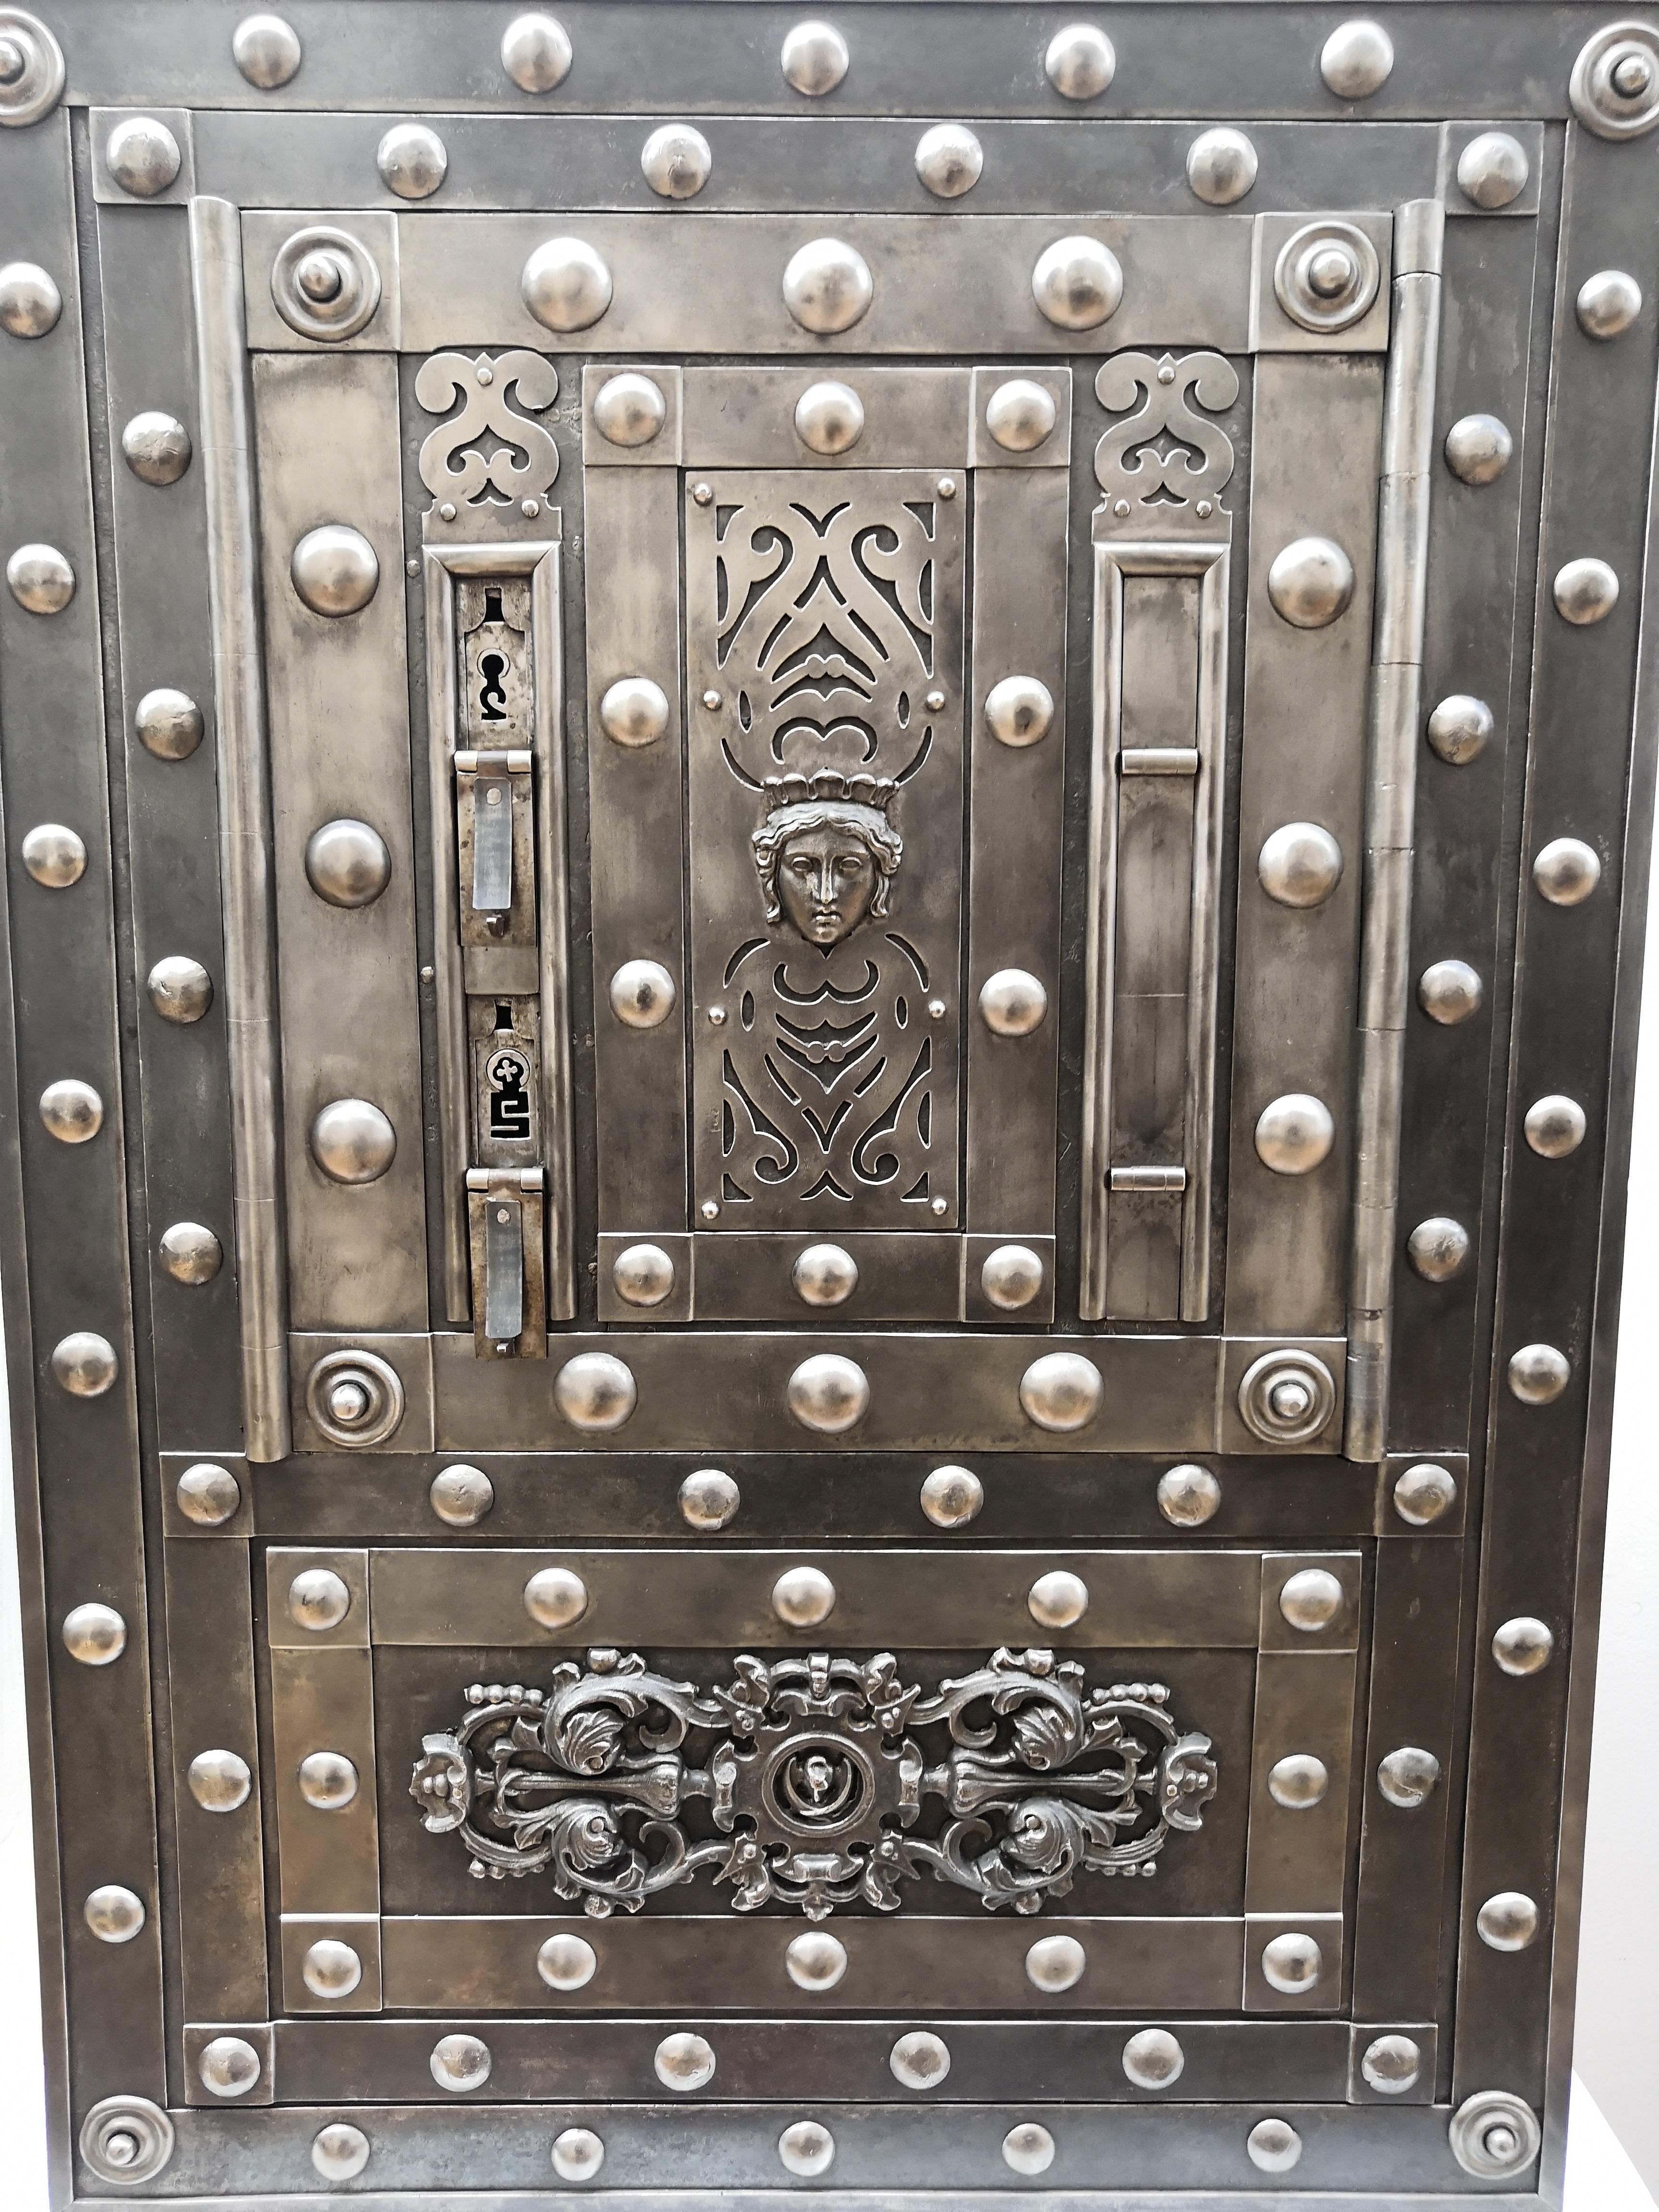 Northern Italian antique safe with typical all-around hobnails, dated circa 1790-1820, probably used inside a small feud fiefdom or fortified town castle of the Piedmont region, Italy's second-largest region where great landscapes are purveyors of